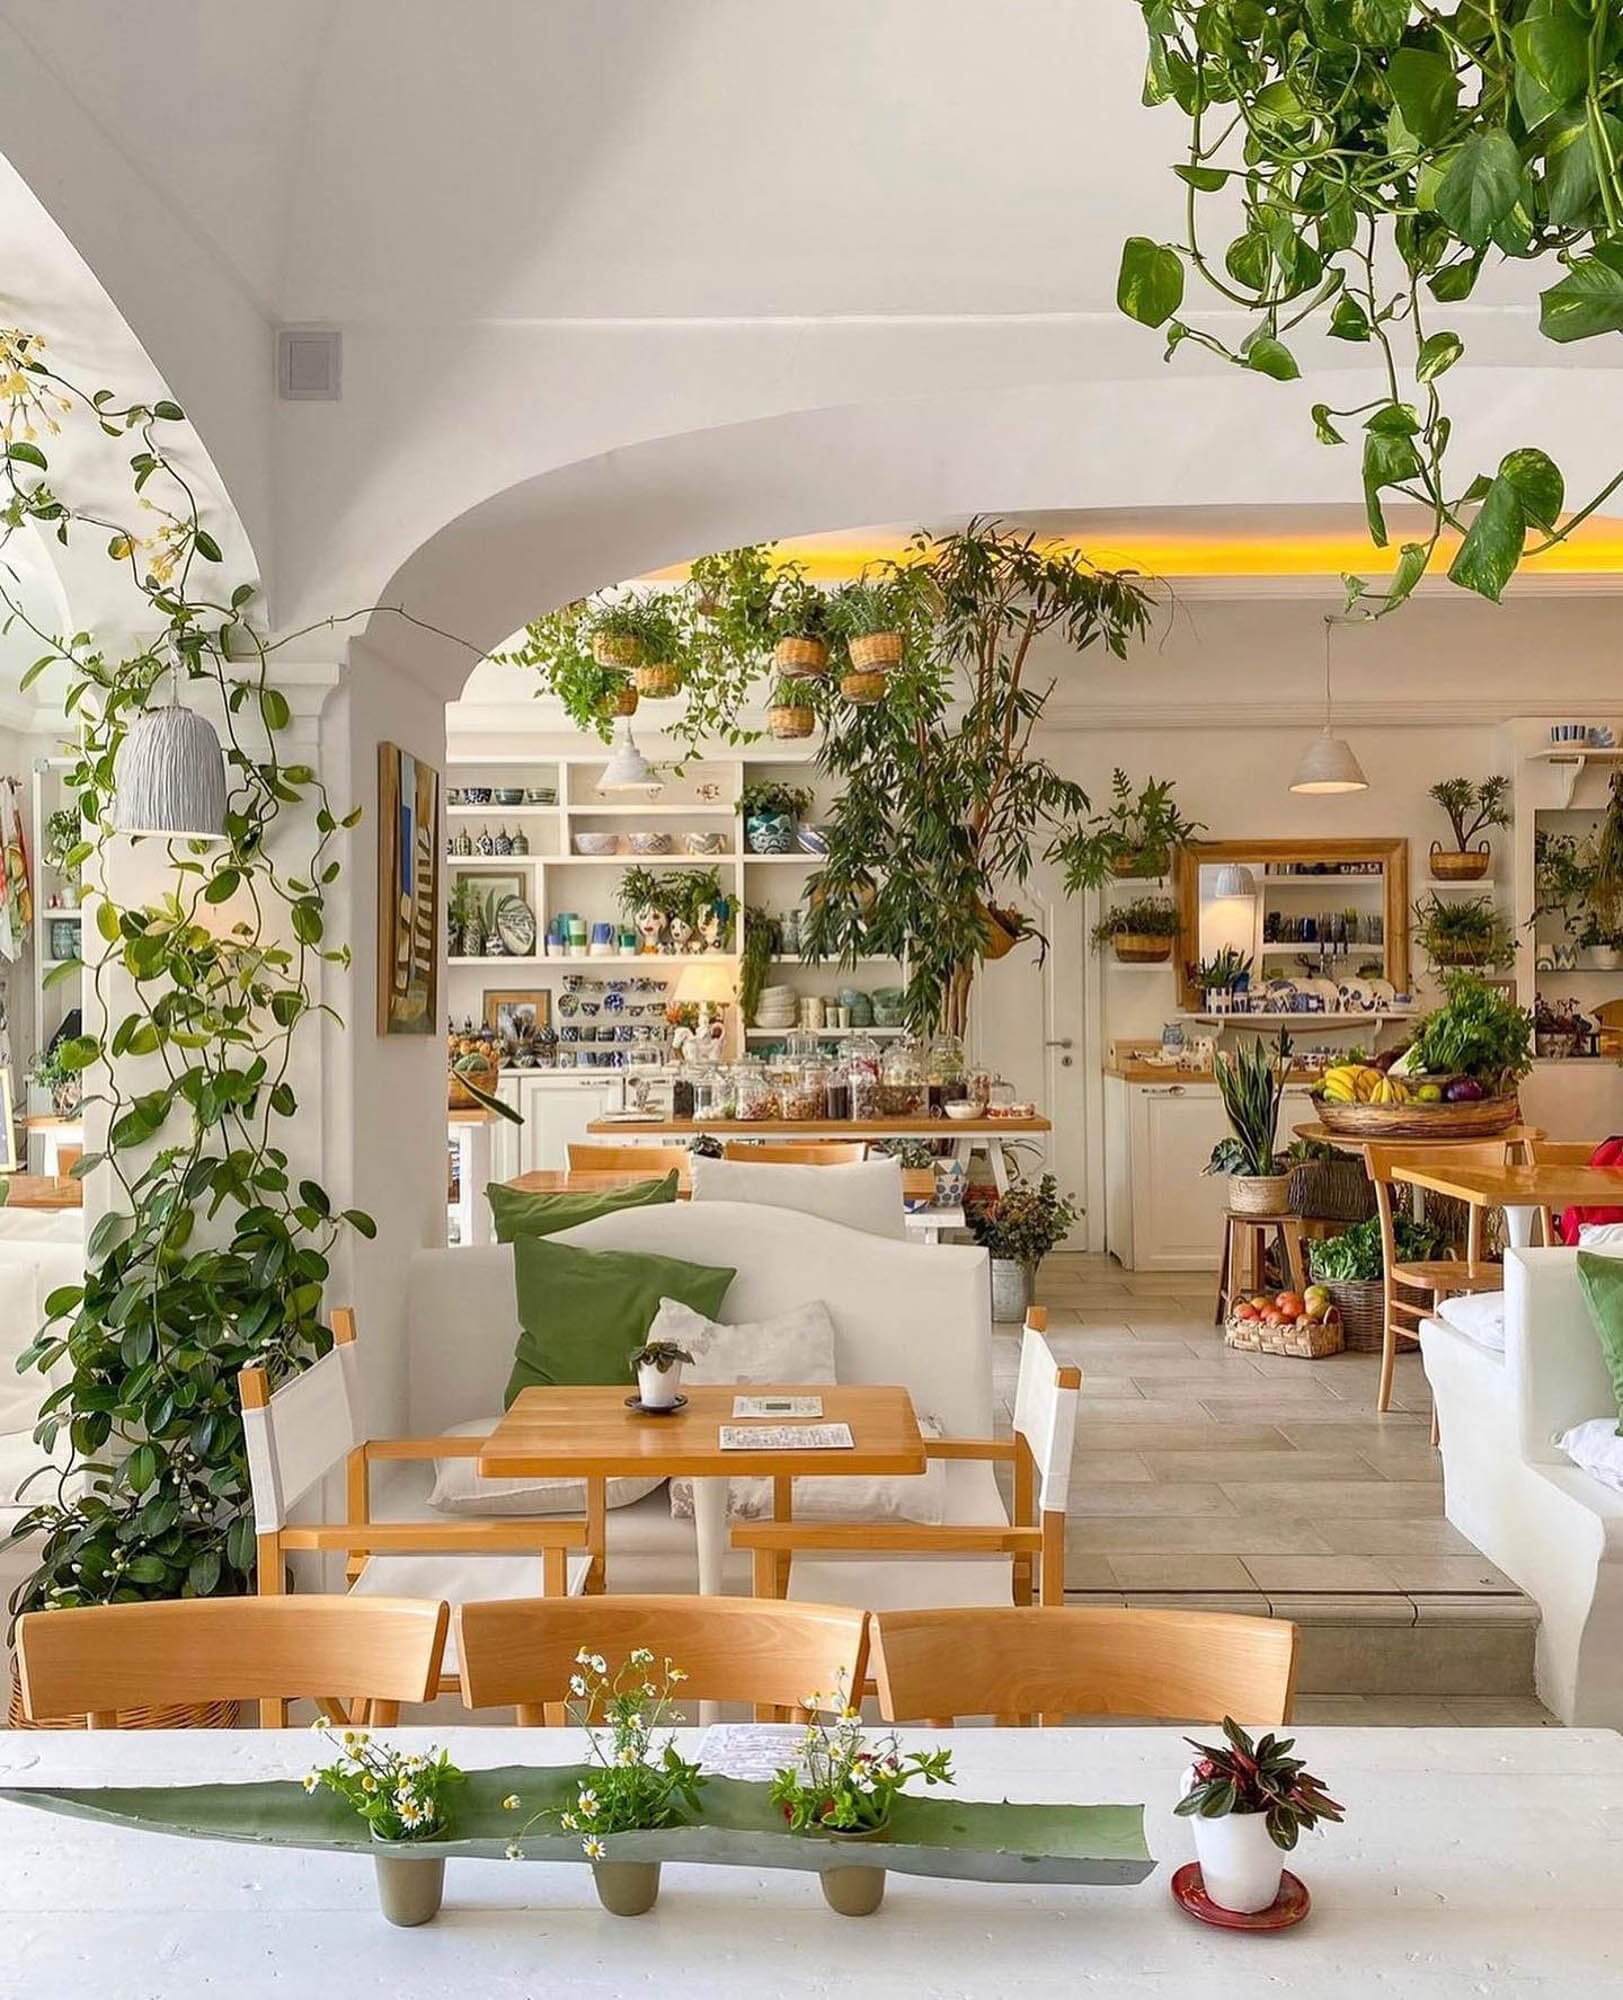 Casa e Bottega in Positano is part design store, part healthy cafe. If you need a healthy Positano restaurant, don’t miss this.